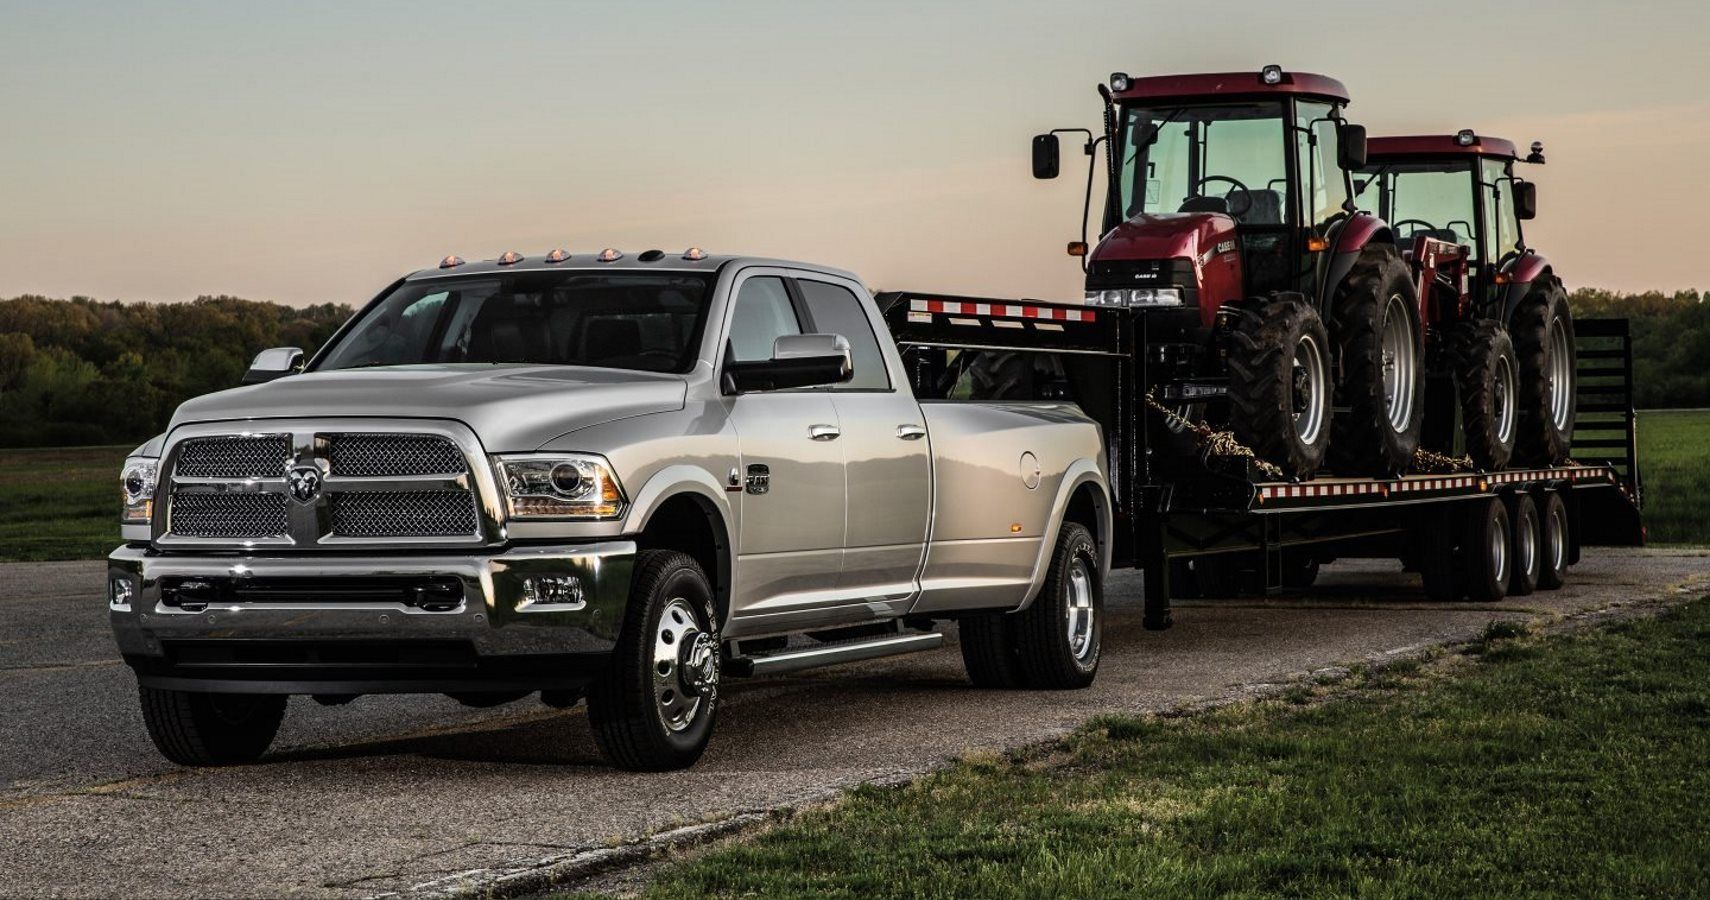 Check Out The Ram 3500 Heavy Duty's Interior